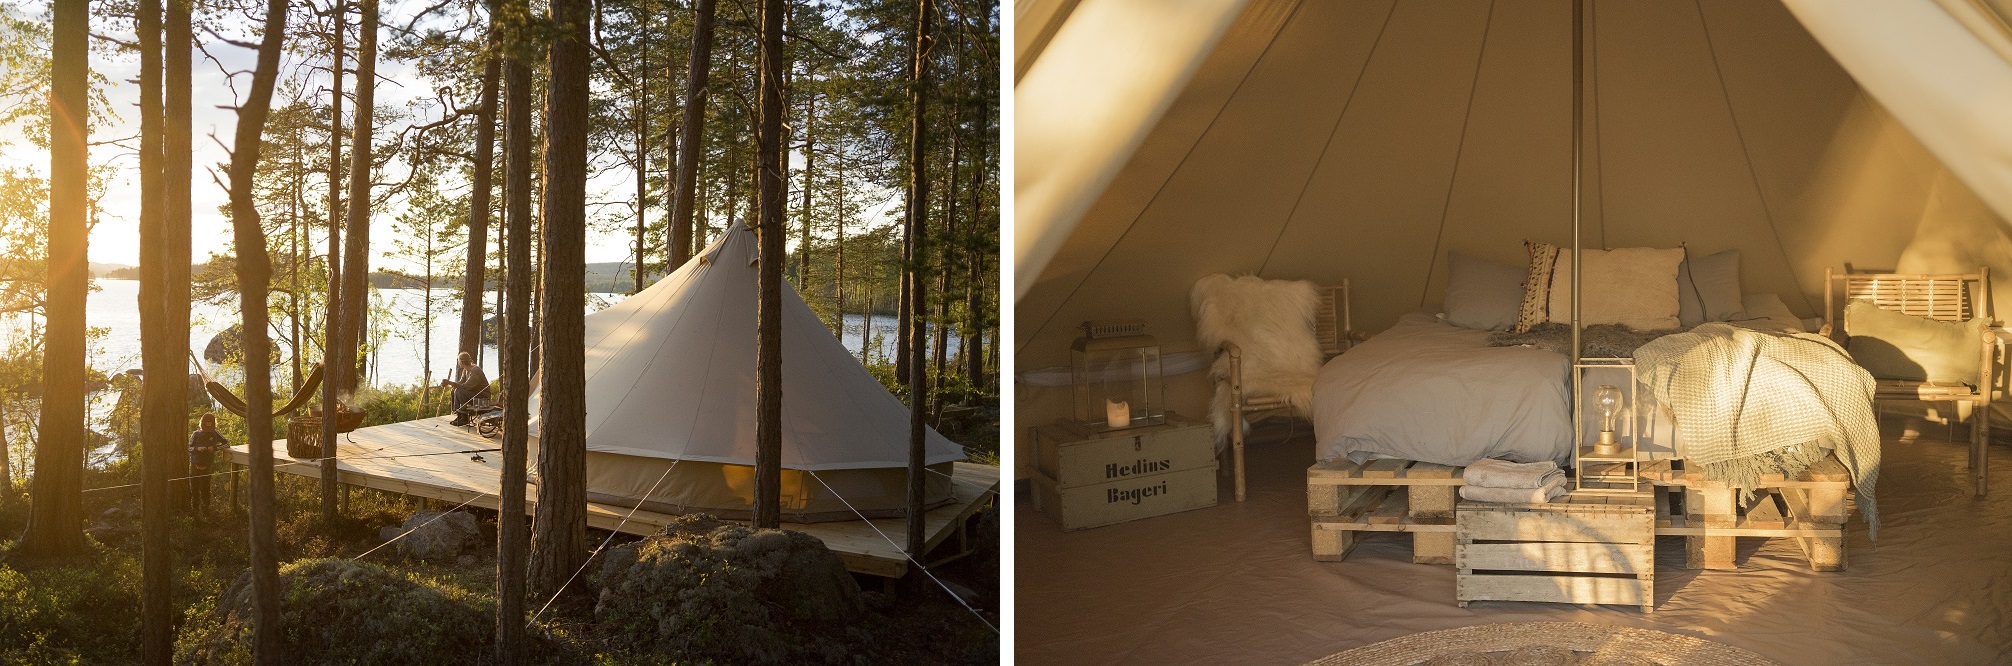 Collage op glampingtent.